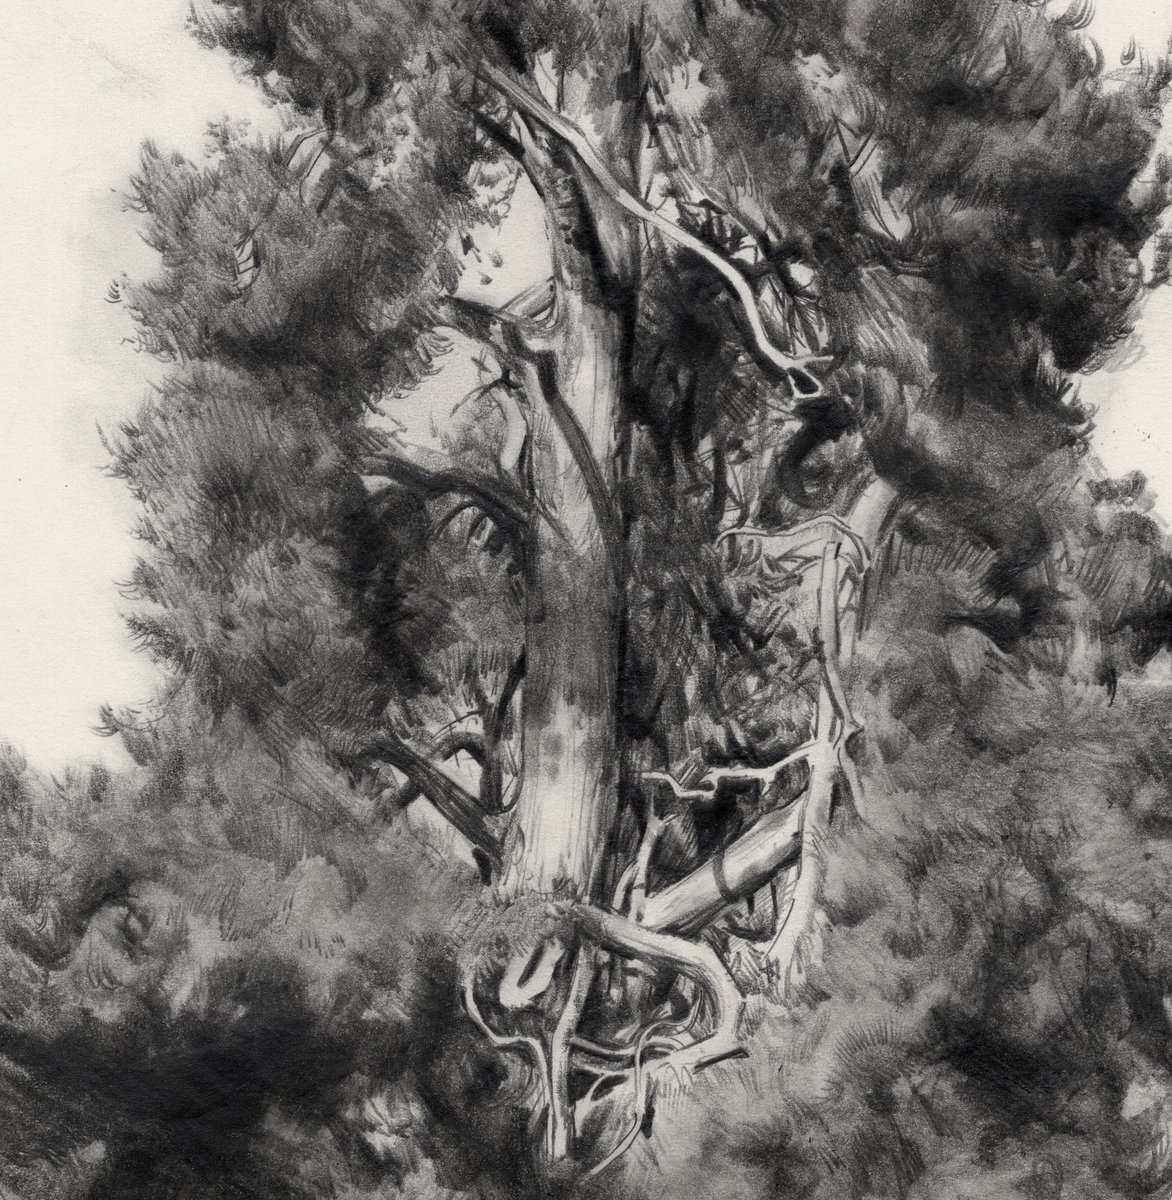 A tree drawing of a tree from Sherwood Forest
Lots of legends and lore about Robin Hood in Sherwood Forest, maybe he saw this very tree! 

graphite on paper